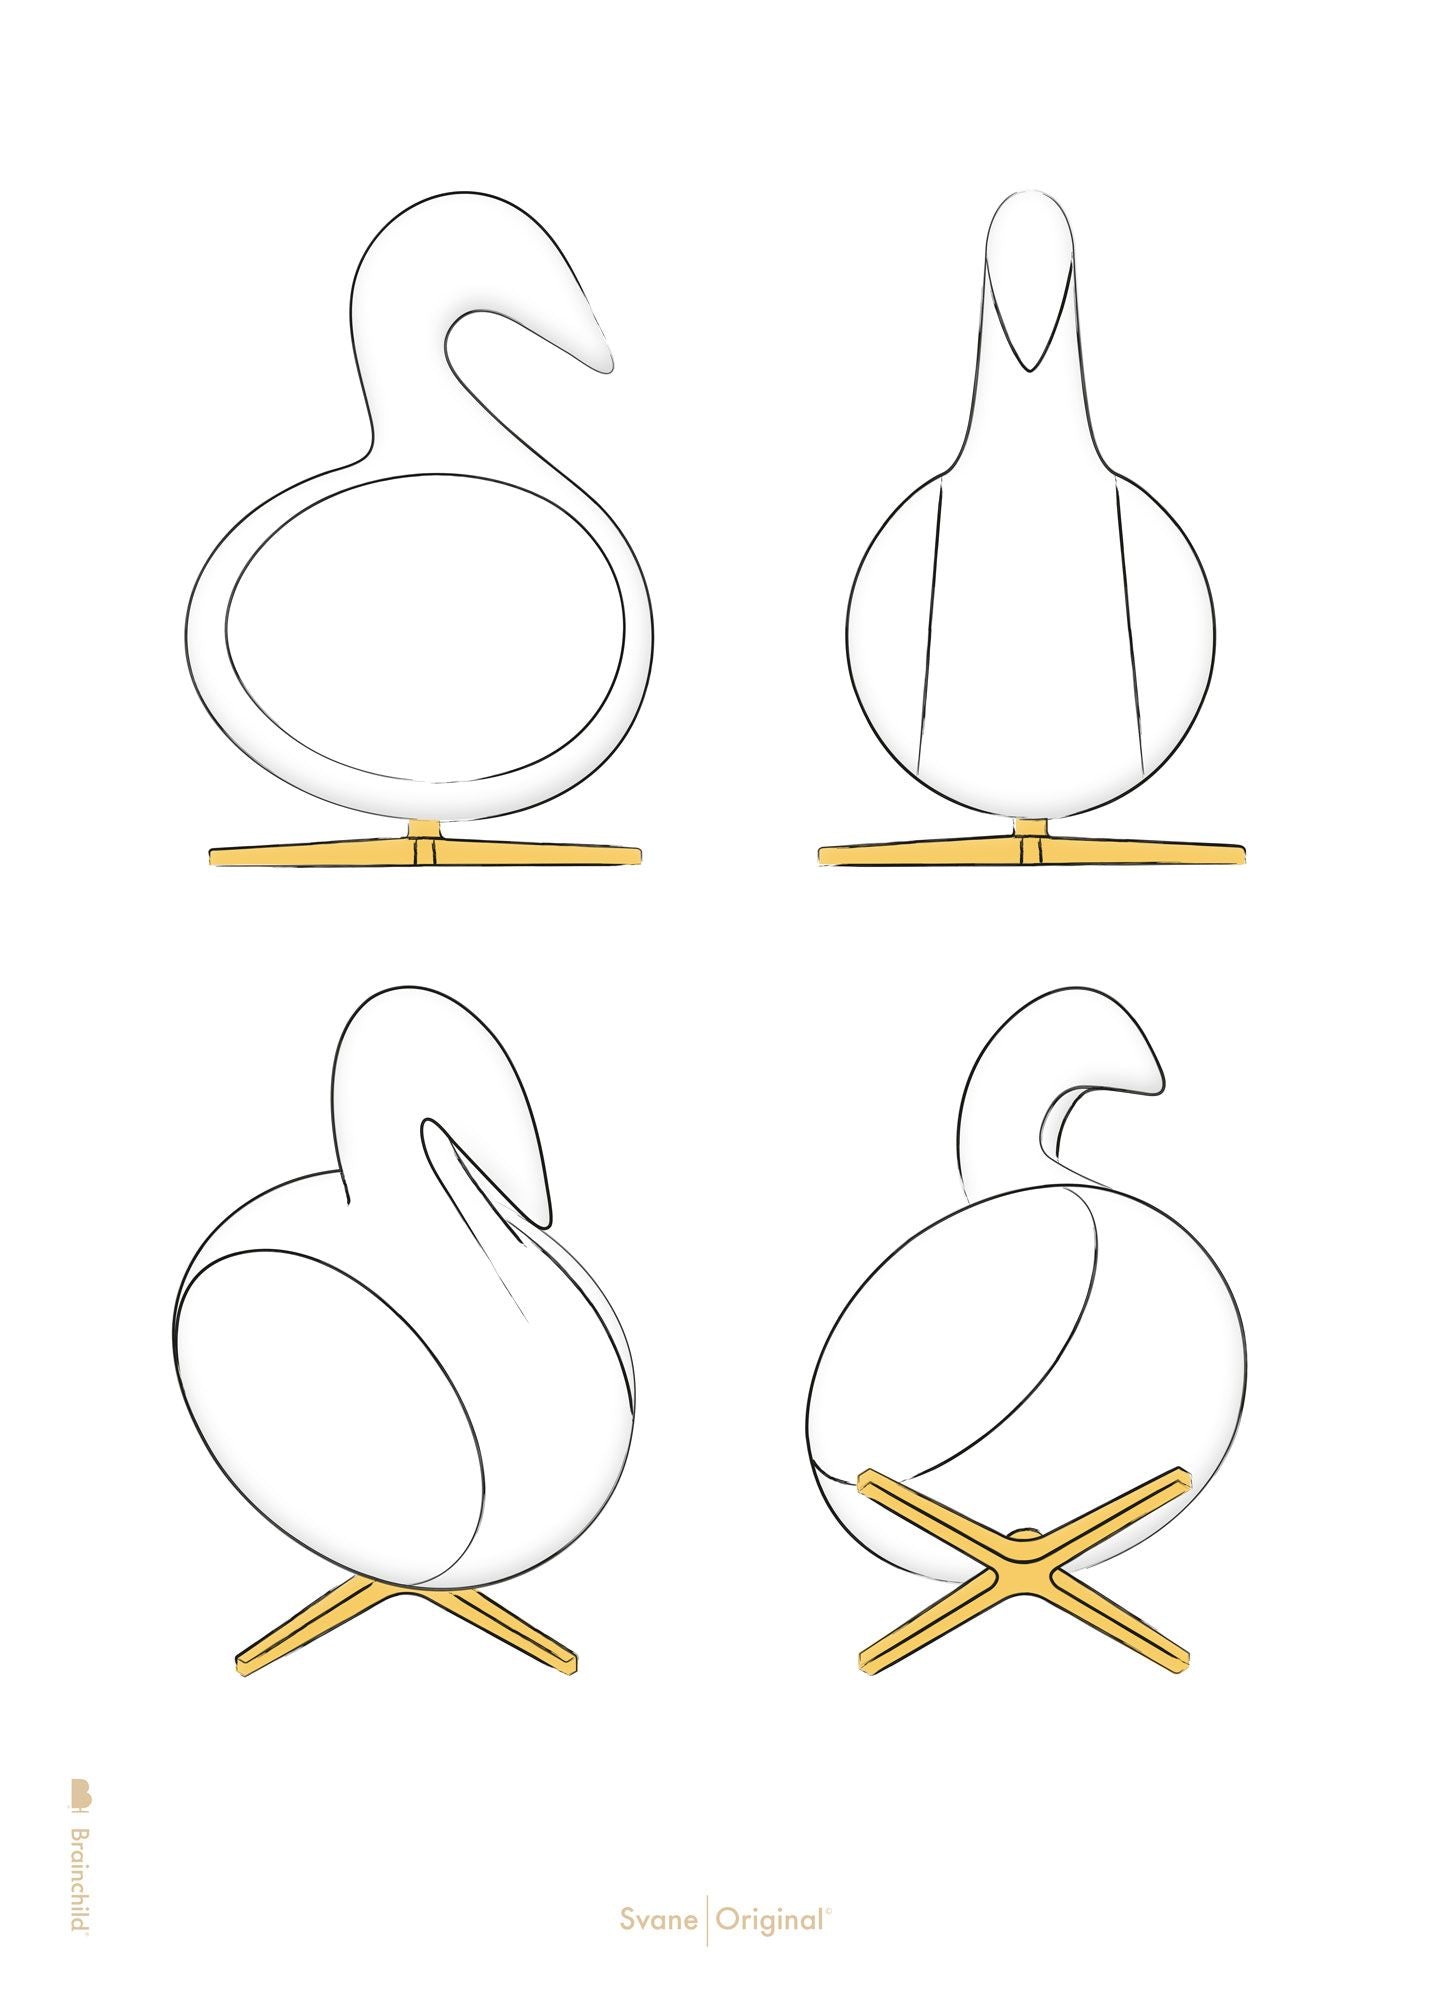 Brainchild Swan Design Sketches Poster Without Frame 70x100 Cm, White Background